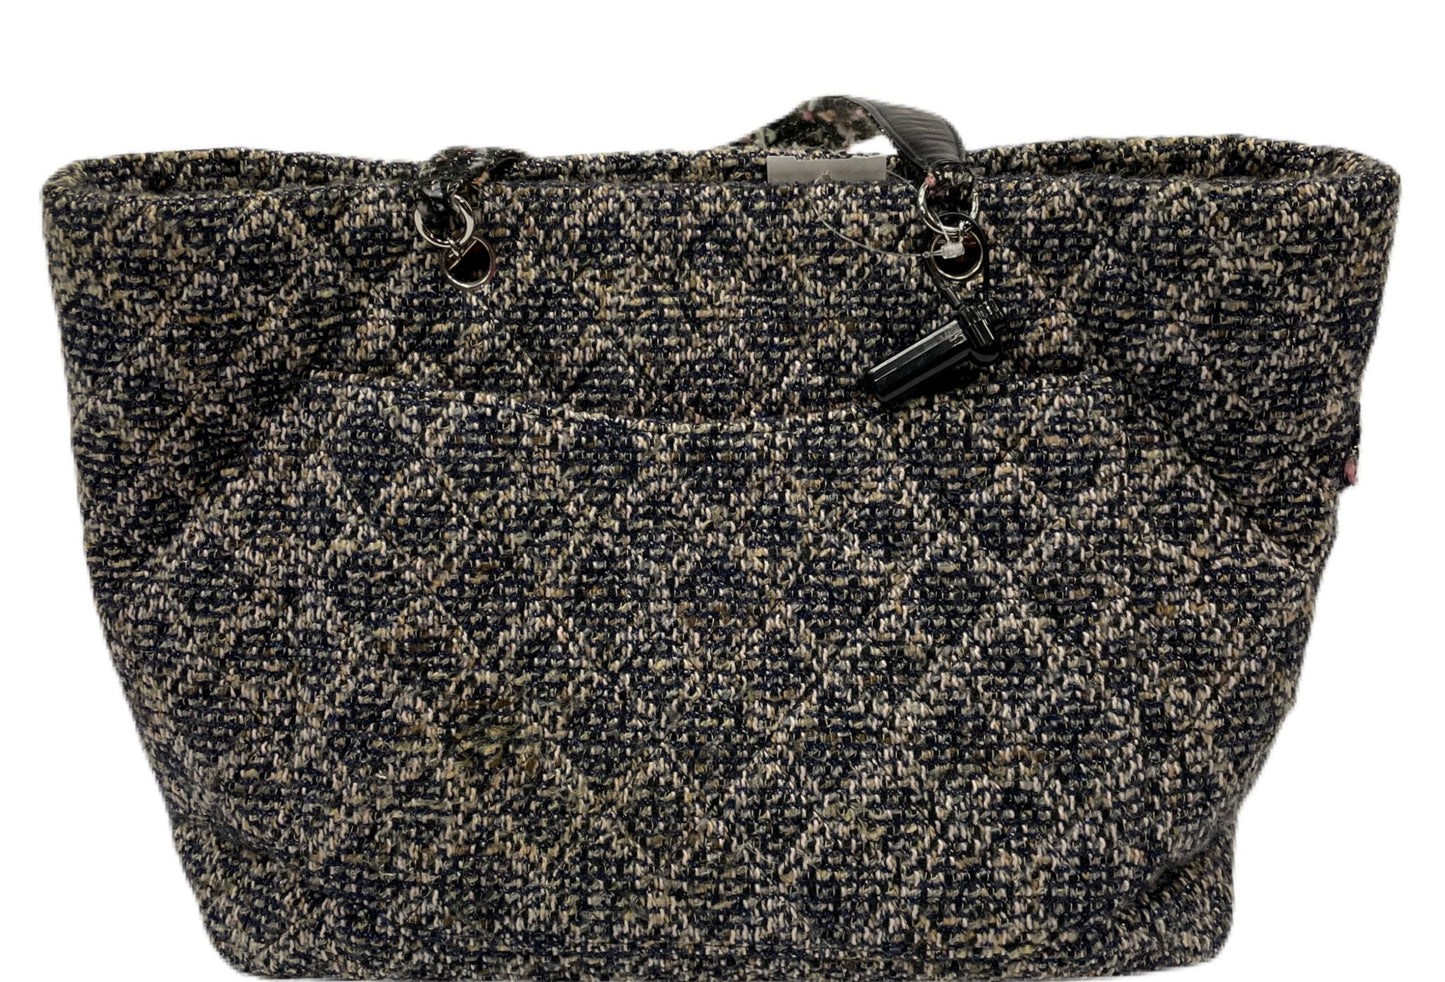 Chanel - Authenticated Cambon Handbag - Tweed Multicolour Plain for Women, Very Good Condition